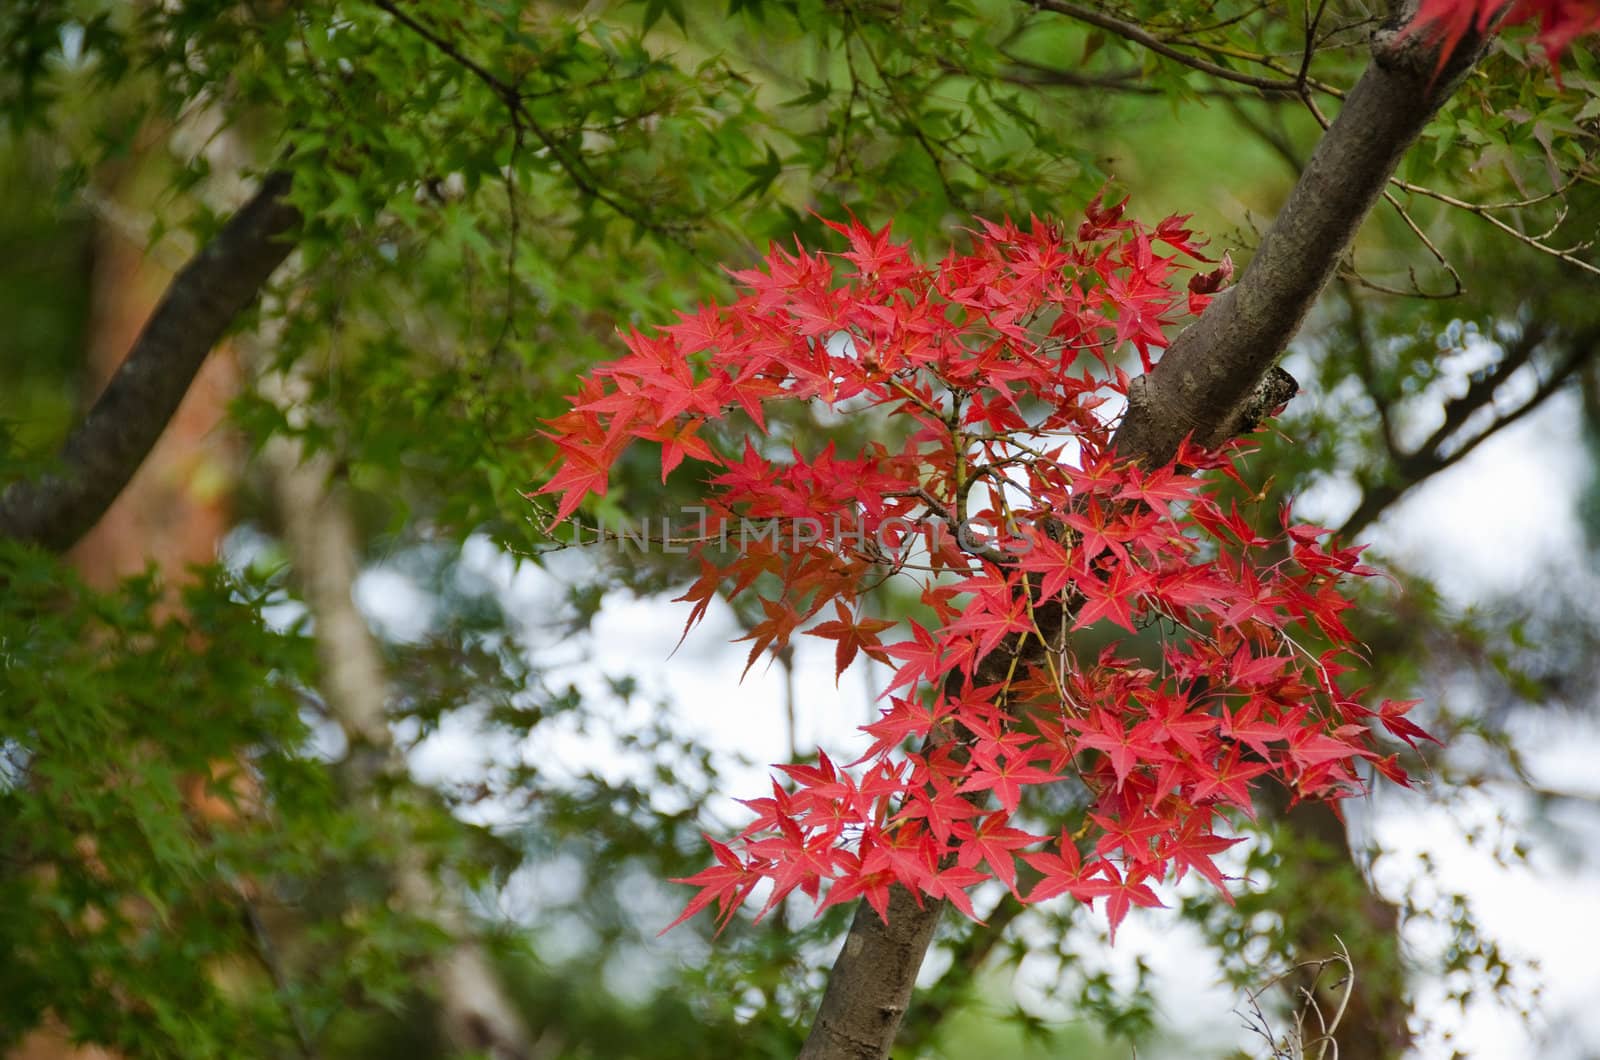 Red leaves of the japanese maple in autumn in front of green leaves, foliage